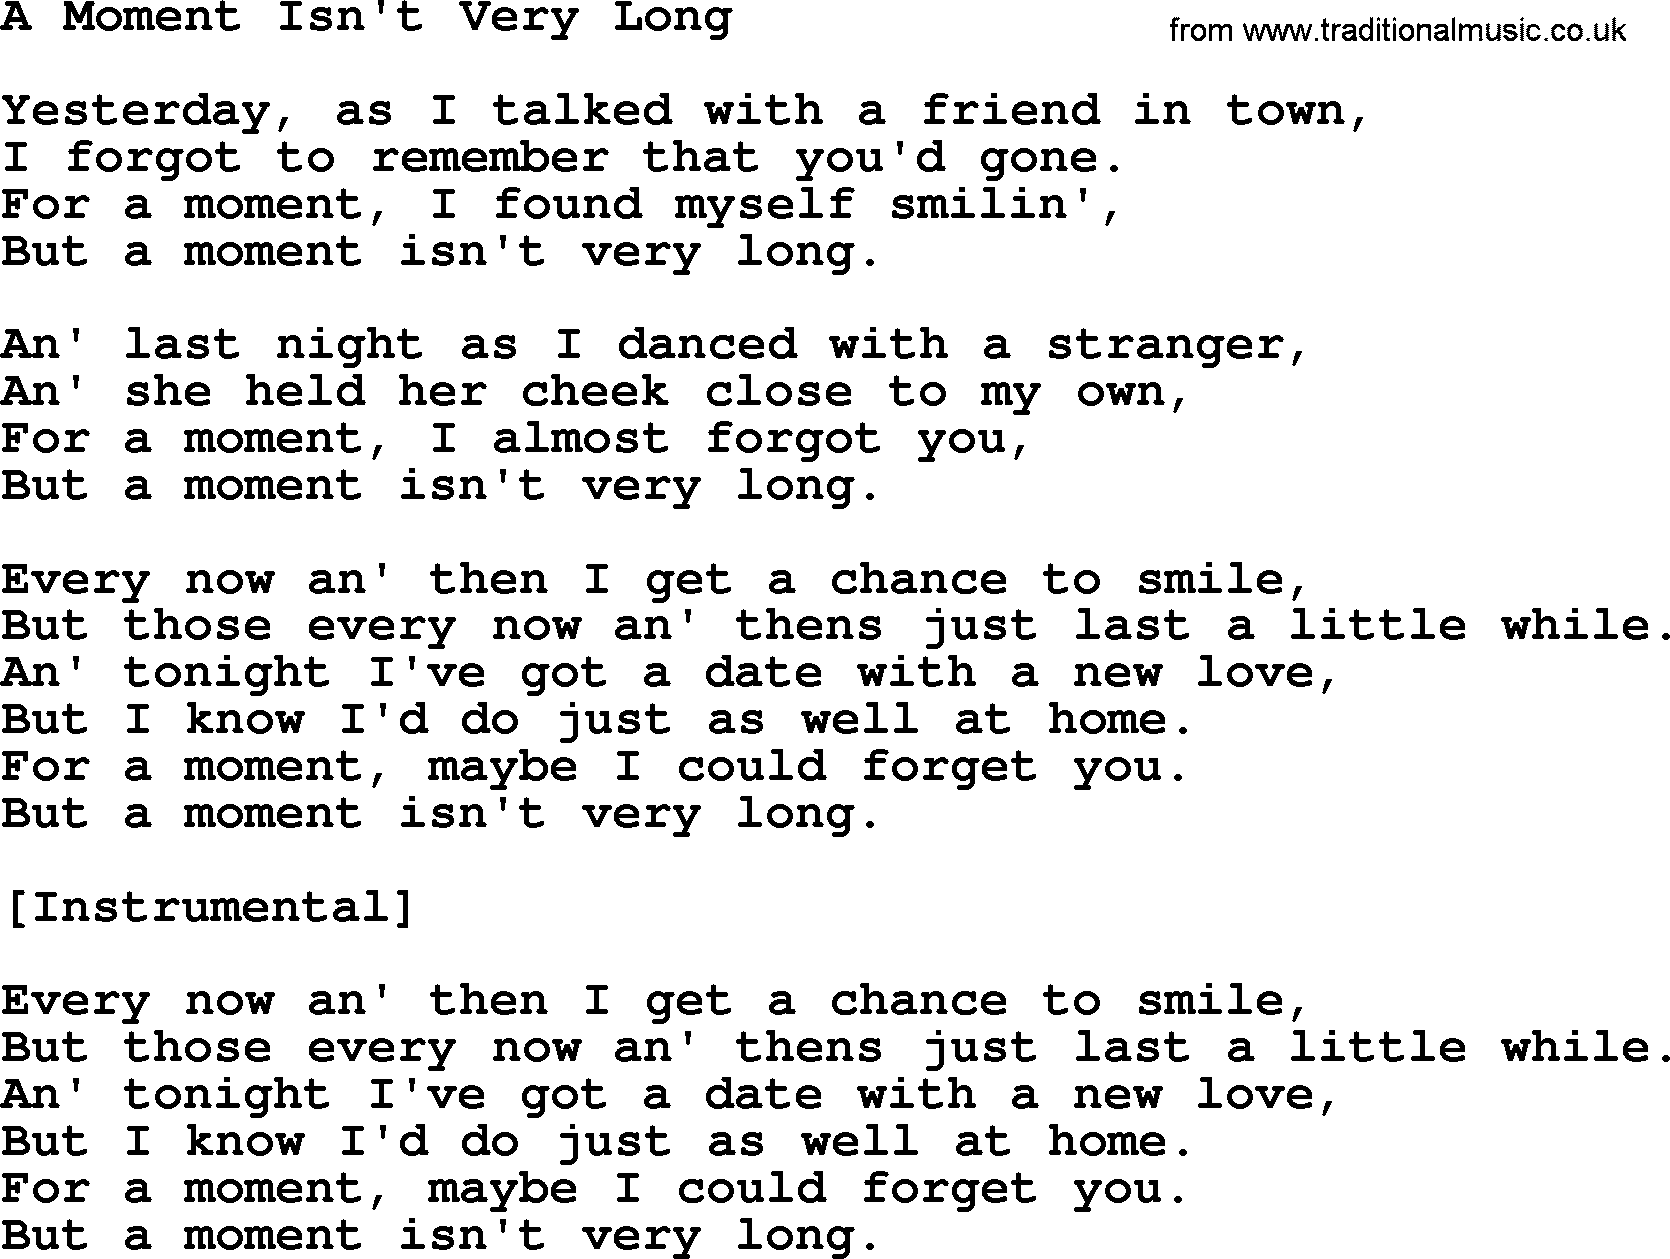 Willie Nelson song: A Moment Isn't Very Long lyrics